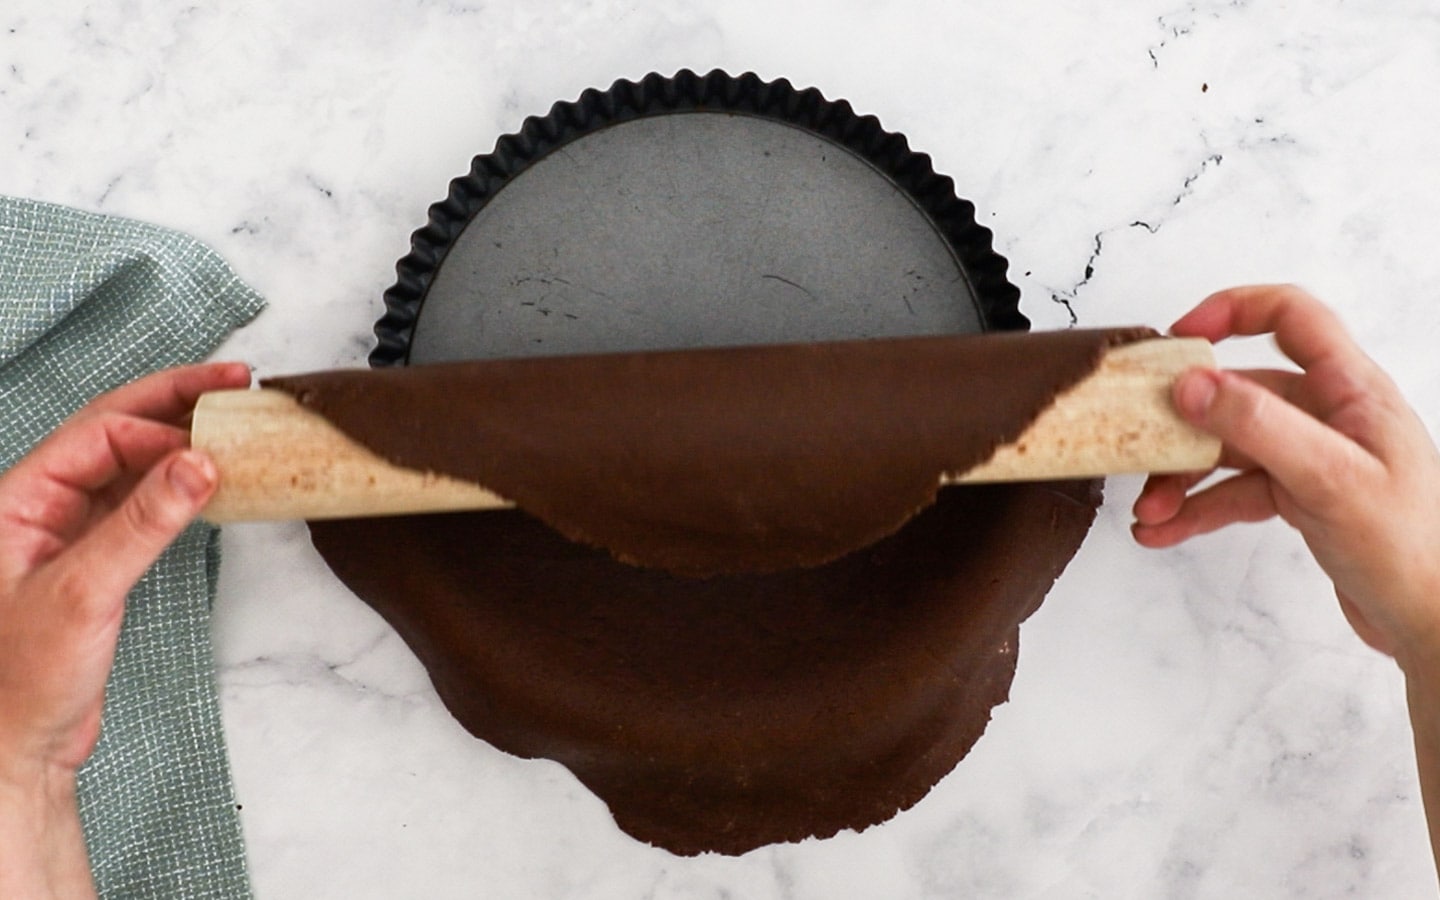 Placing the pastry dough into the tart pan.